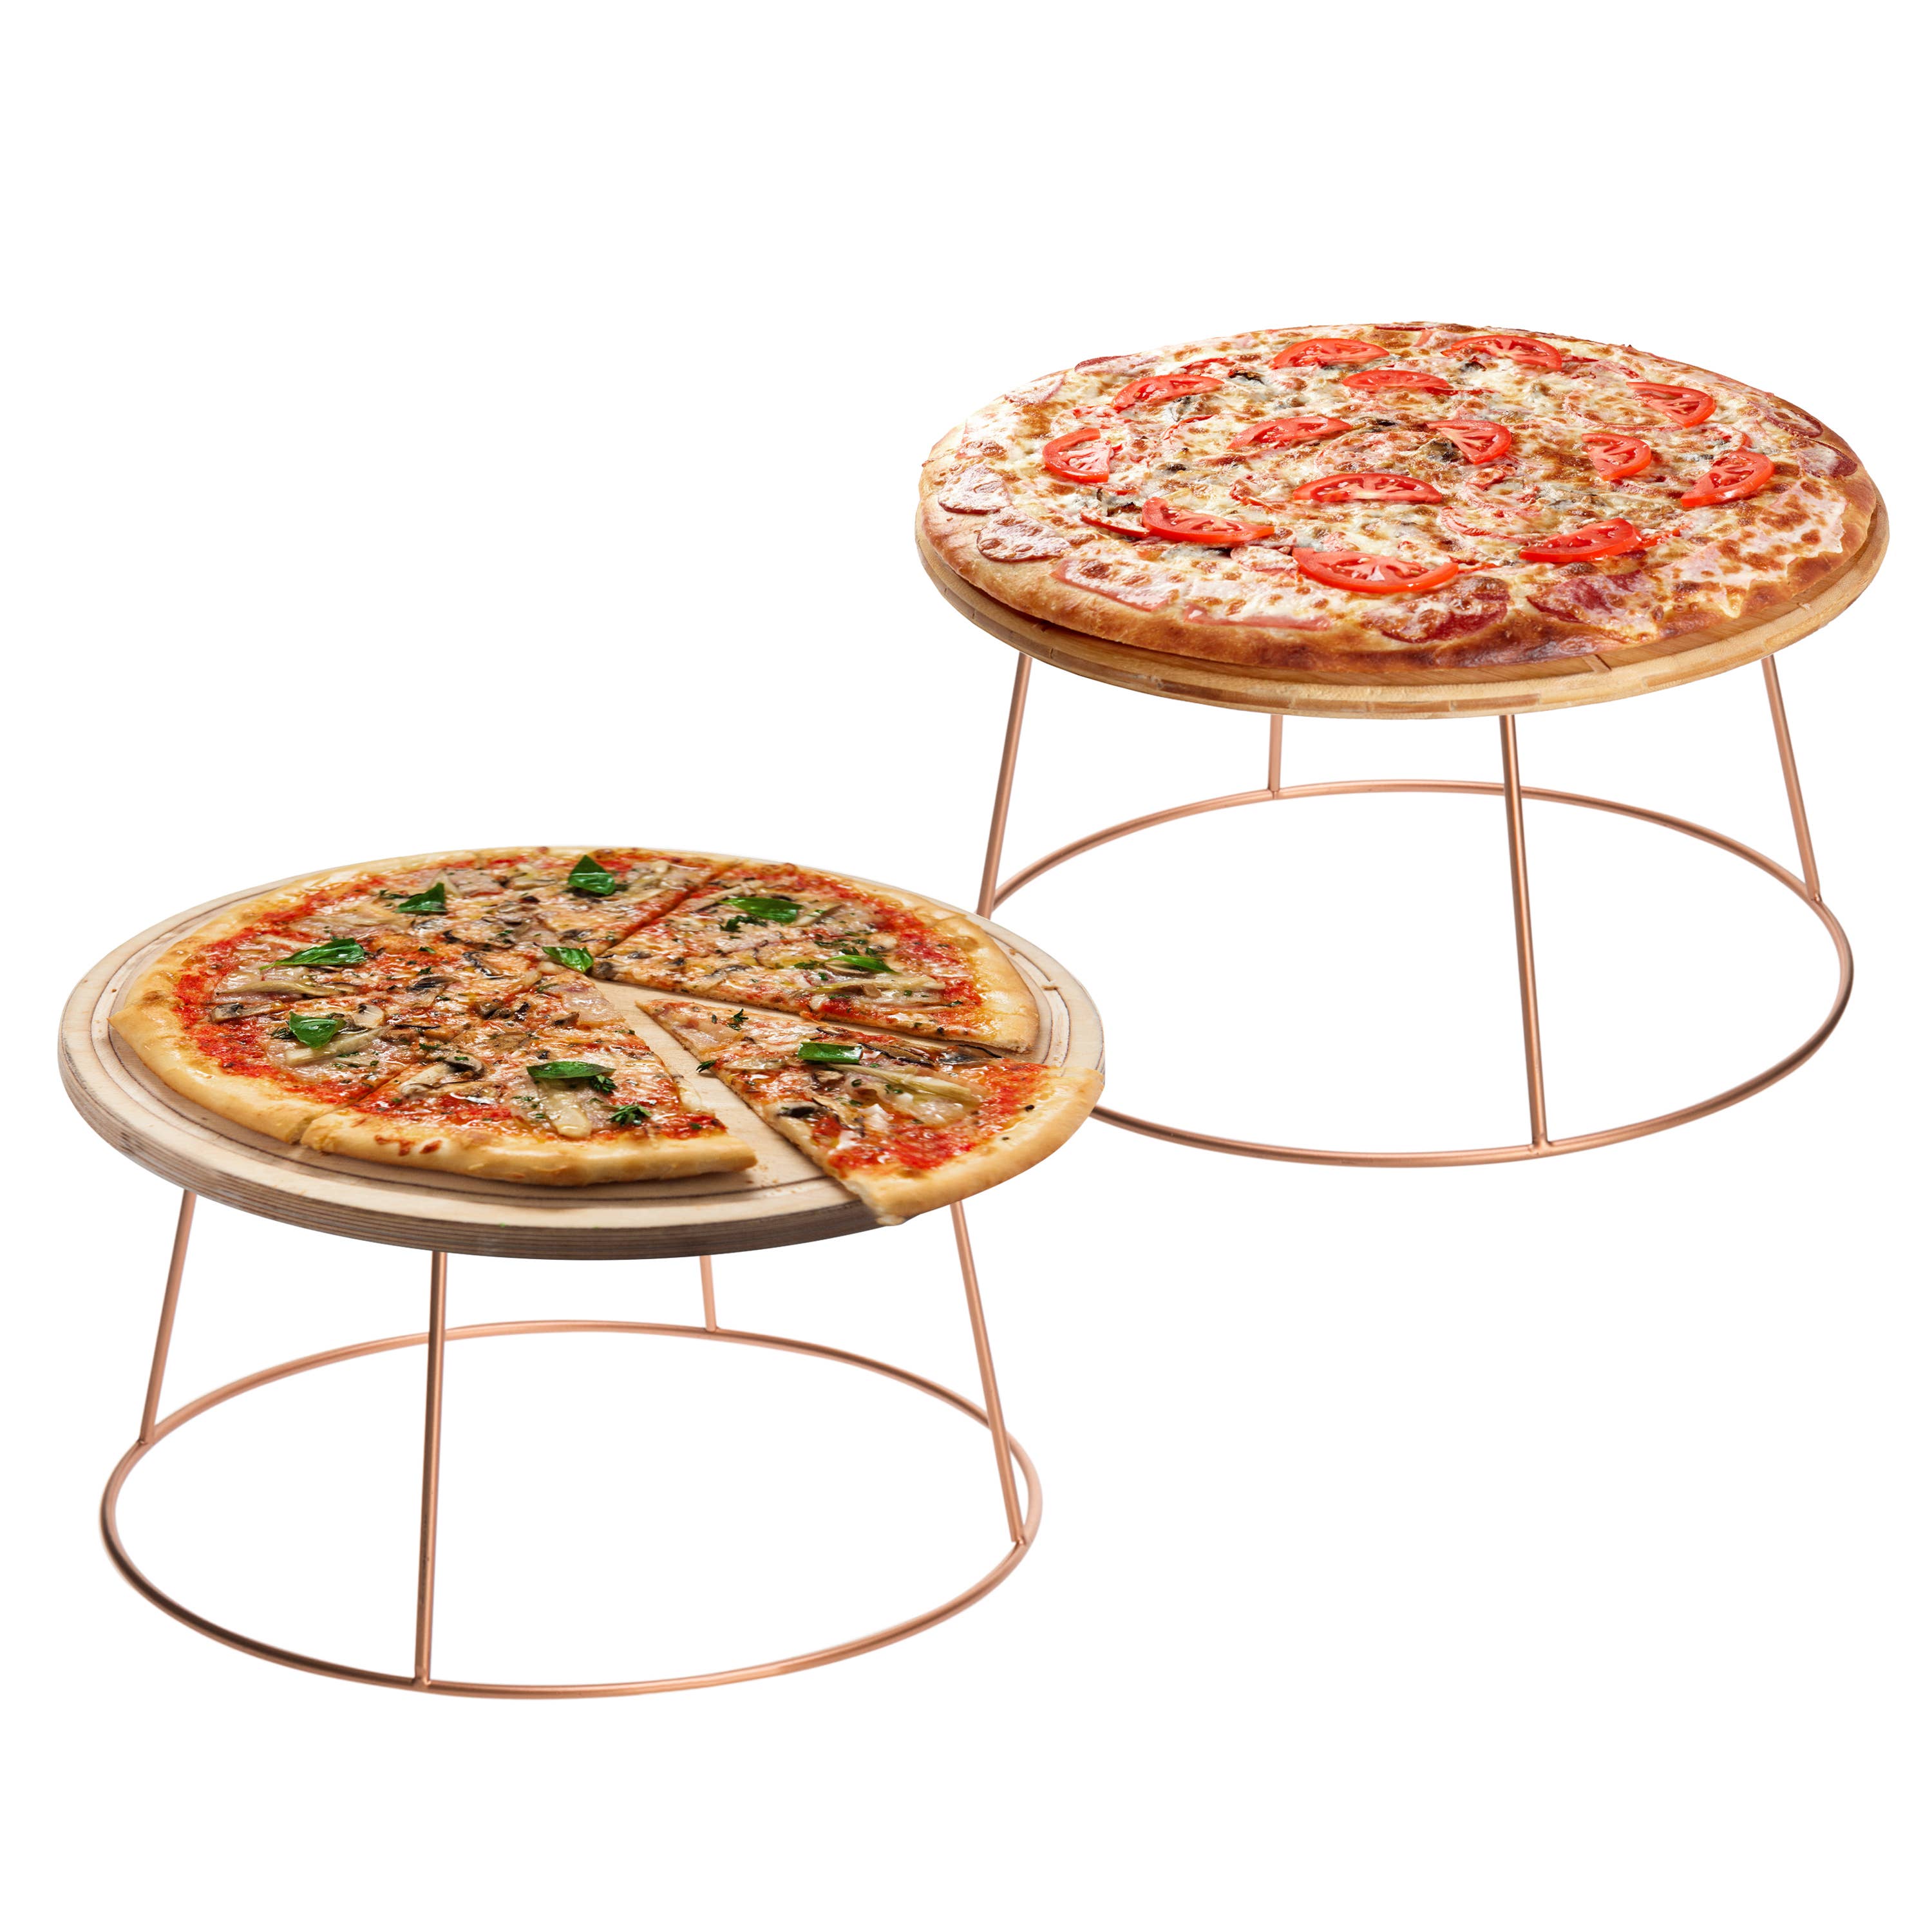 MyGift Modern Copper Metal Wire Round Pizza Pan Riser Holder and Cake Plate Display Rack Stands Set of 3 